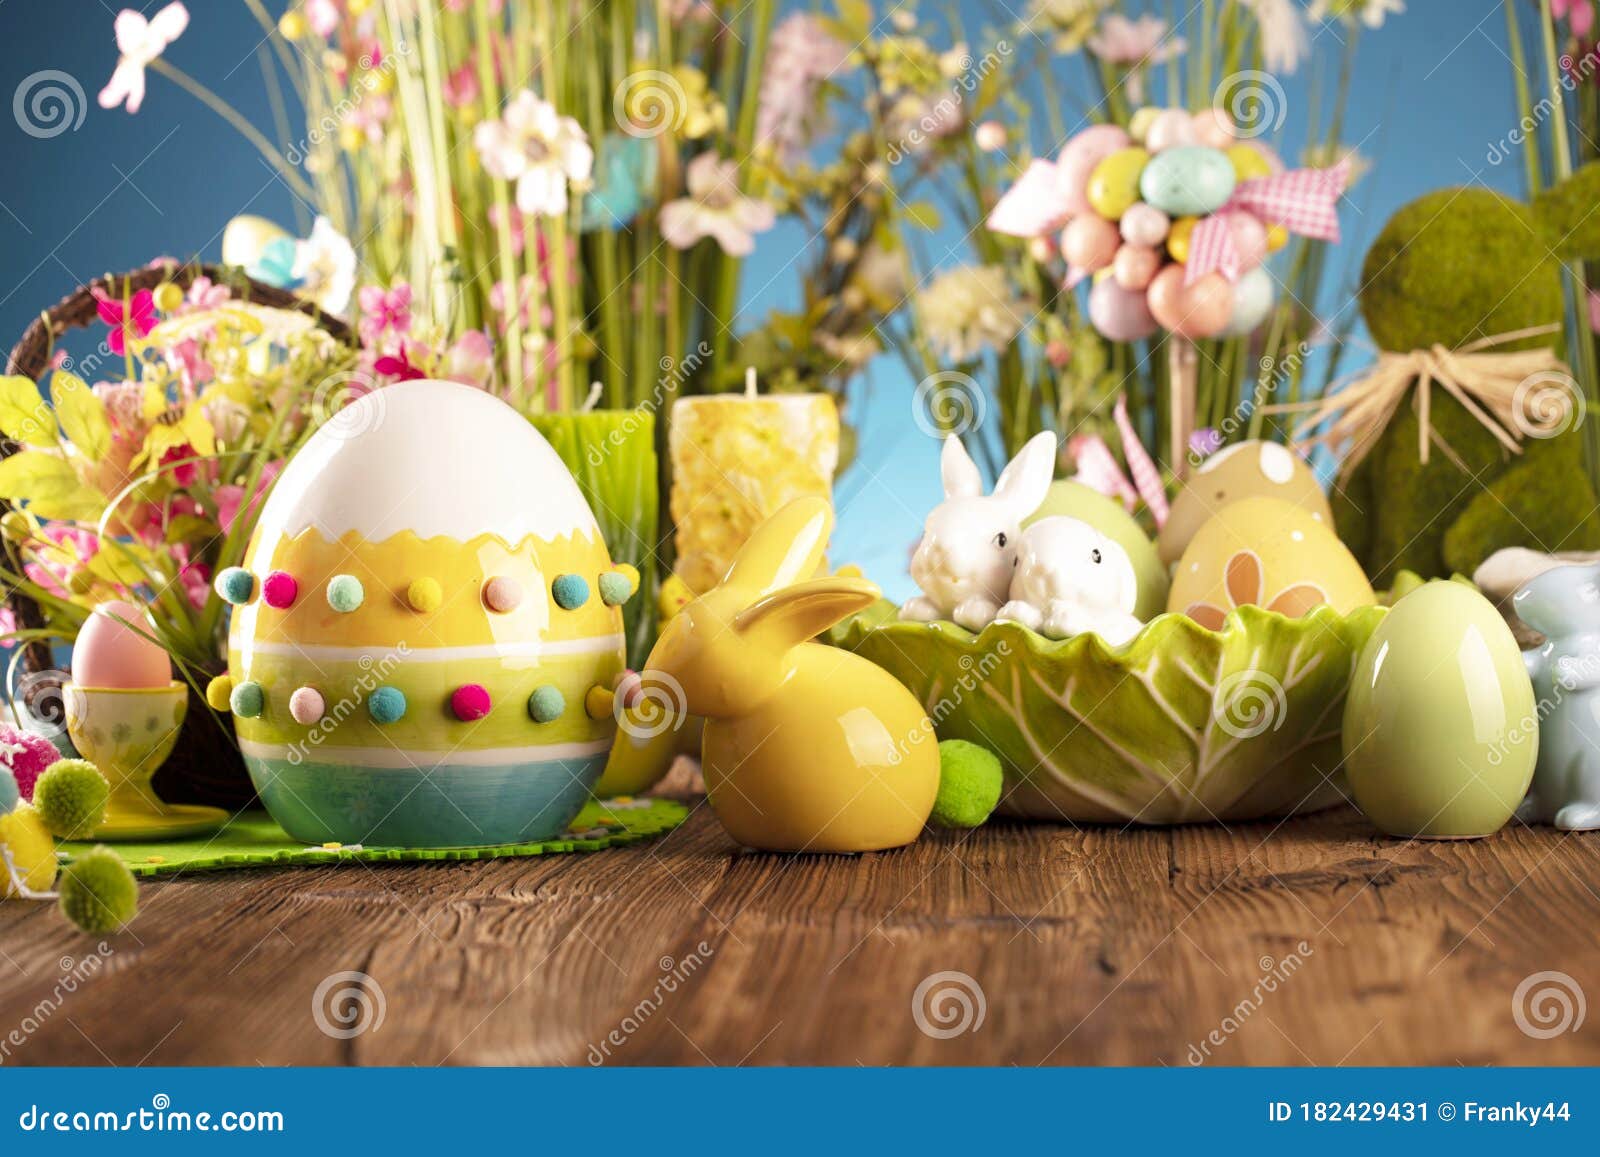 Easter Theme. Easter Decorations. Place for Text. Stock Image - Image of happy, color: 182429431